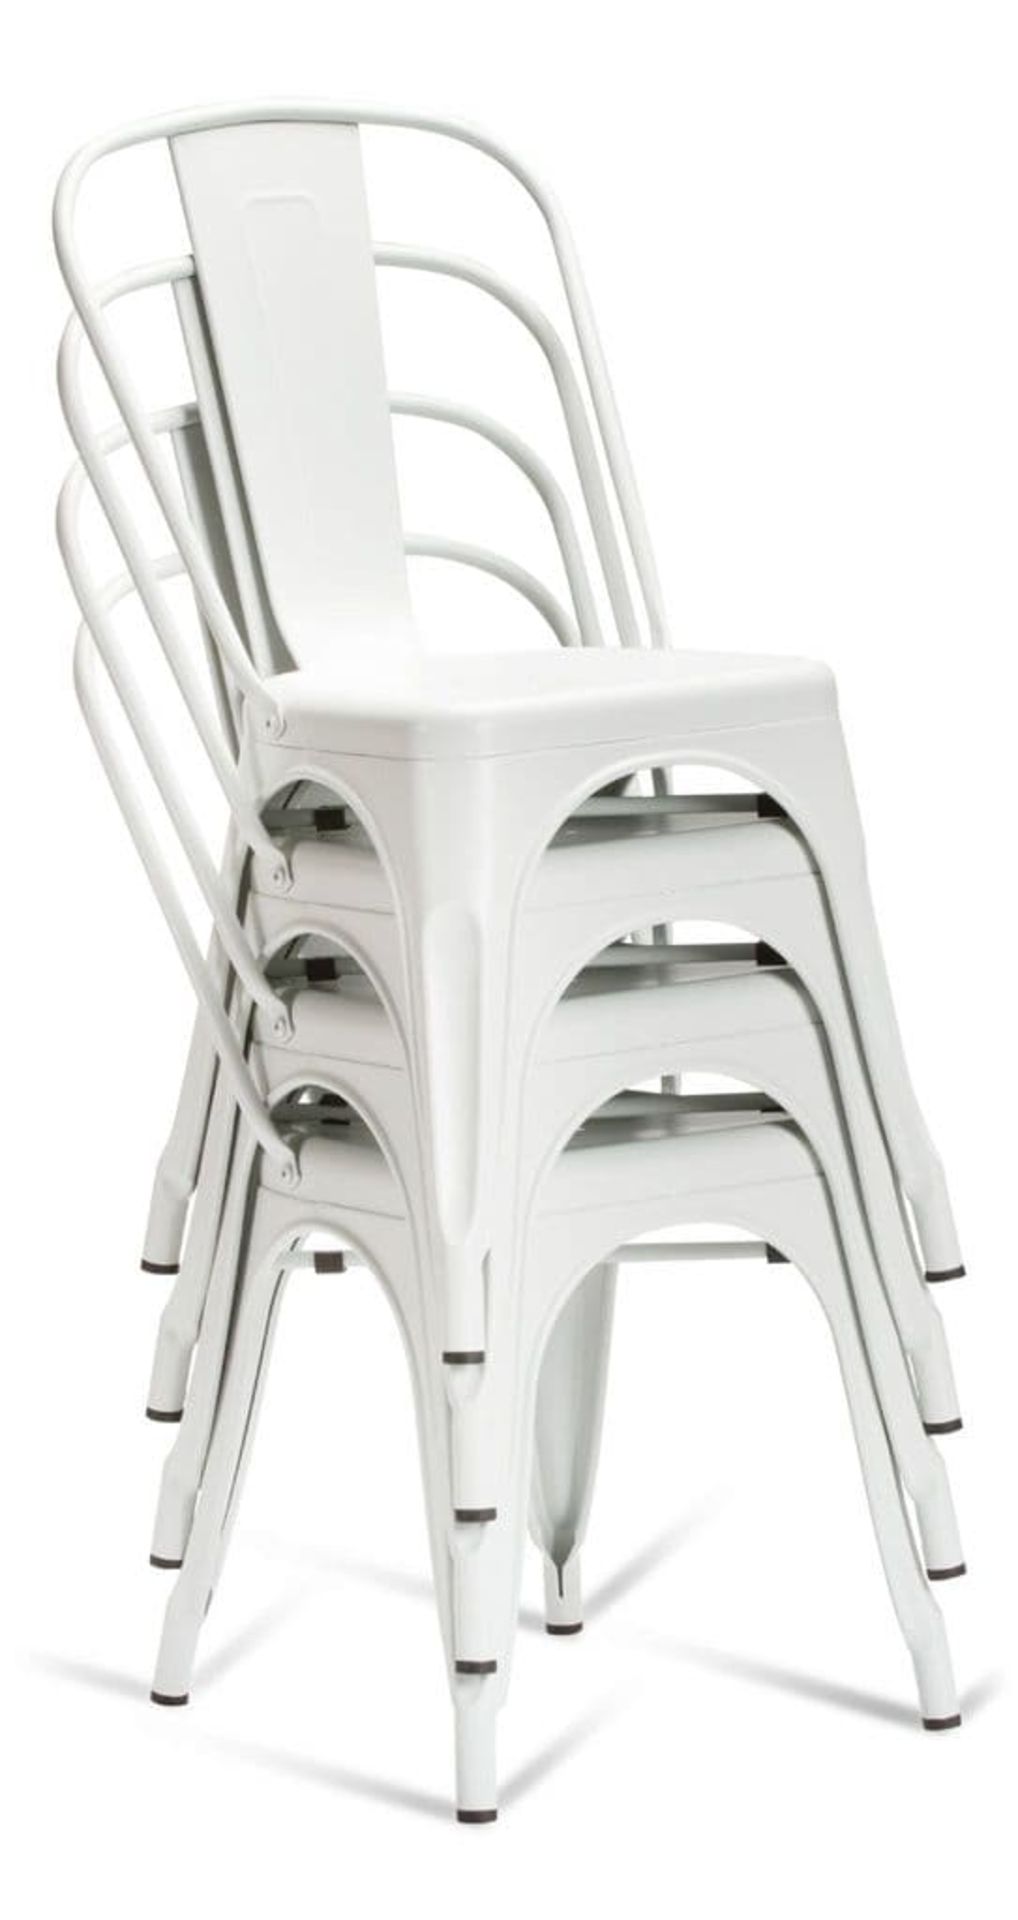 1 x Tolix Industrial Style Outdoor Bistro Table and Chair Set in White- Includes 1 x Table and 4 x - Image 12 of 14